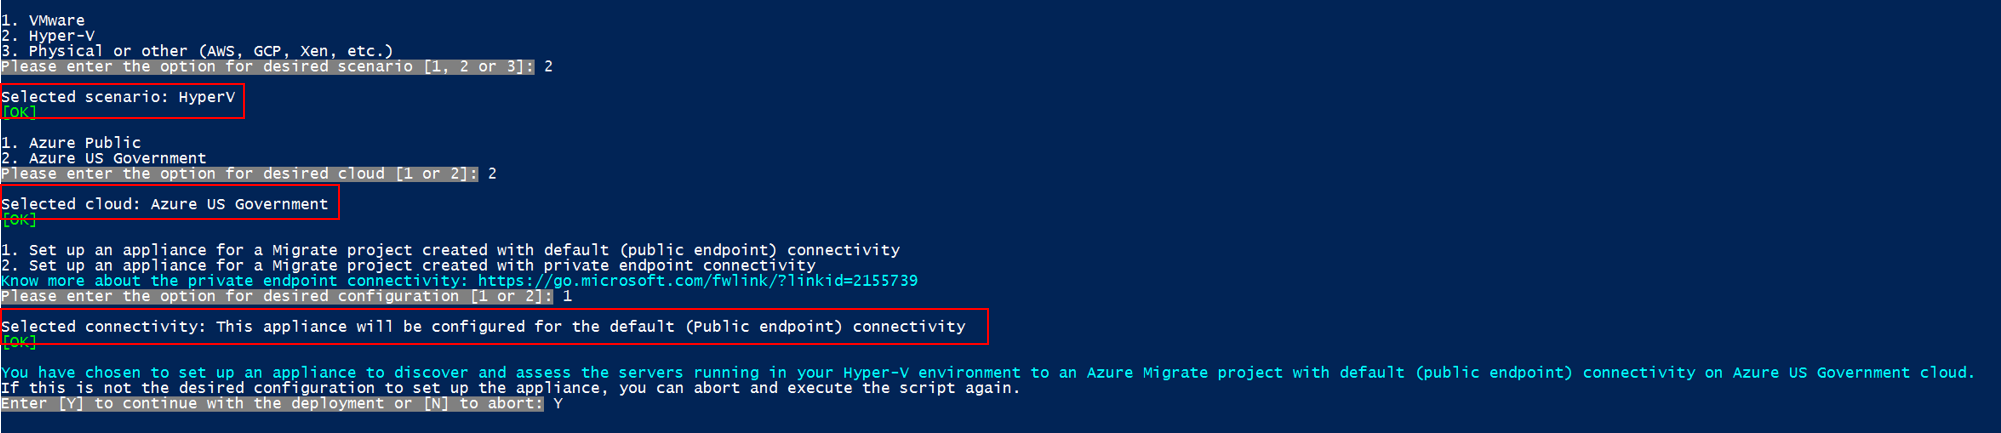 Screenshot that shows how to set up appliance with desired configuration for Hyper-V.